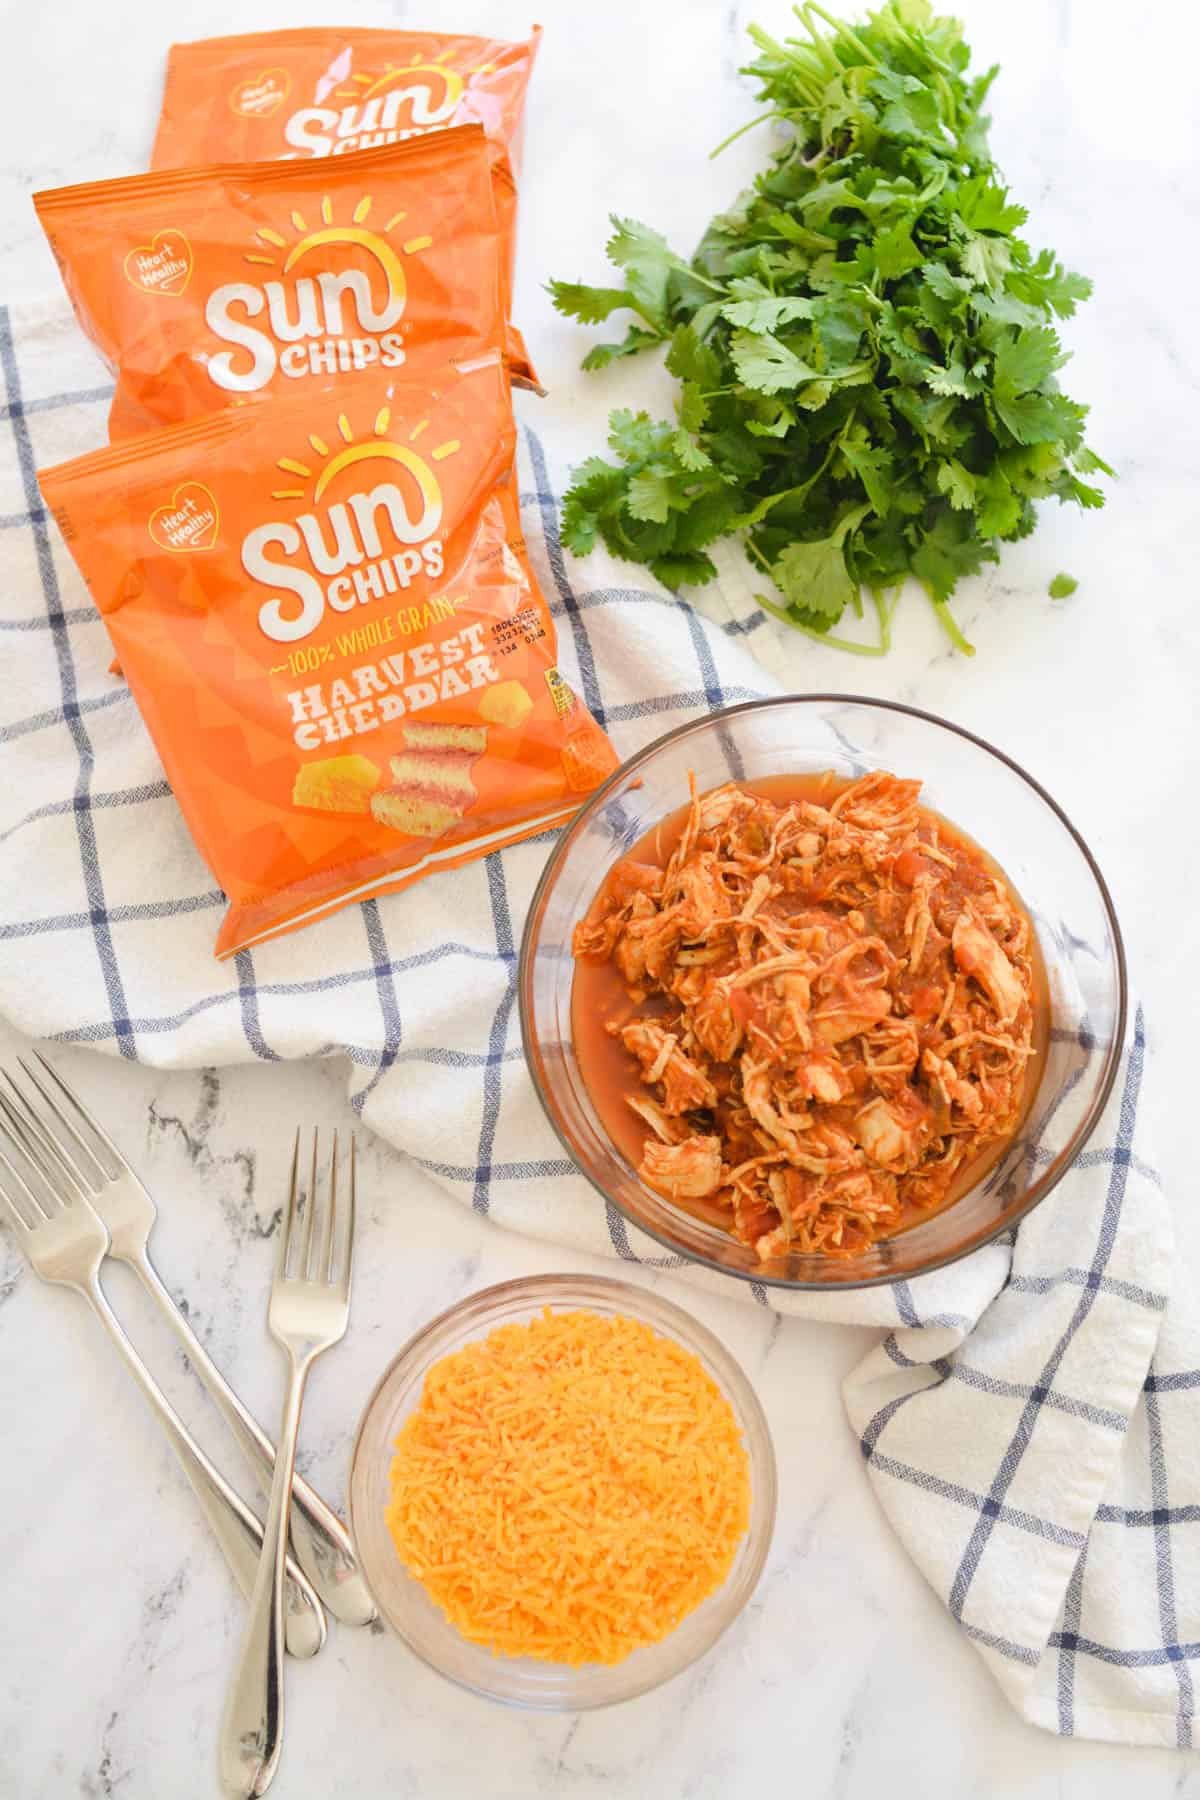 A bowl of salsa chicken on a table next to cilantro, cheese and bags of Sun Chips.